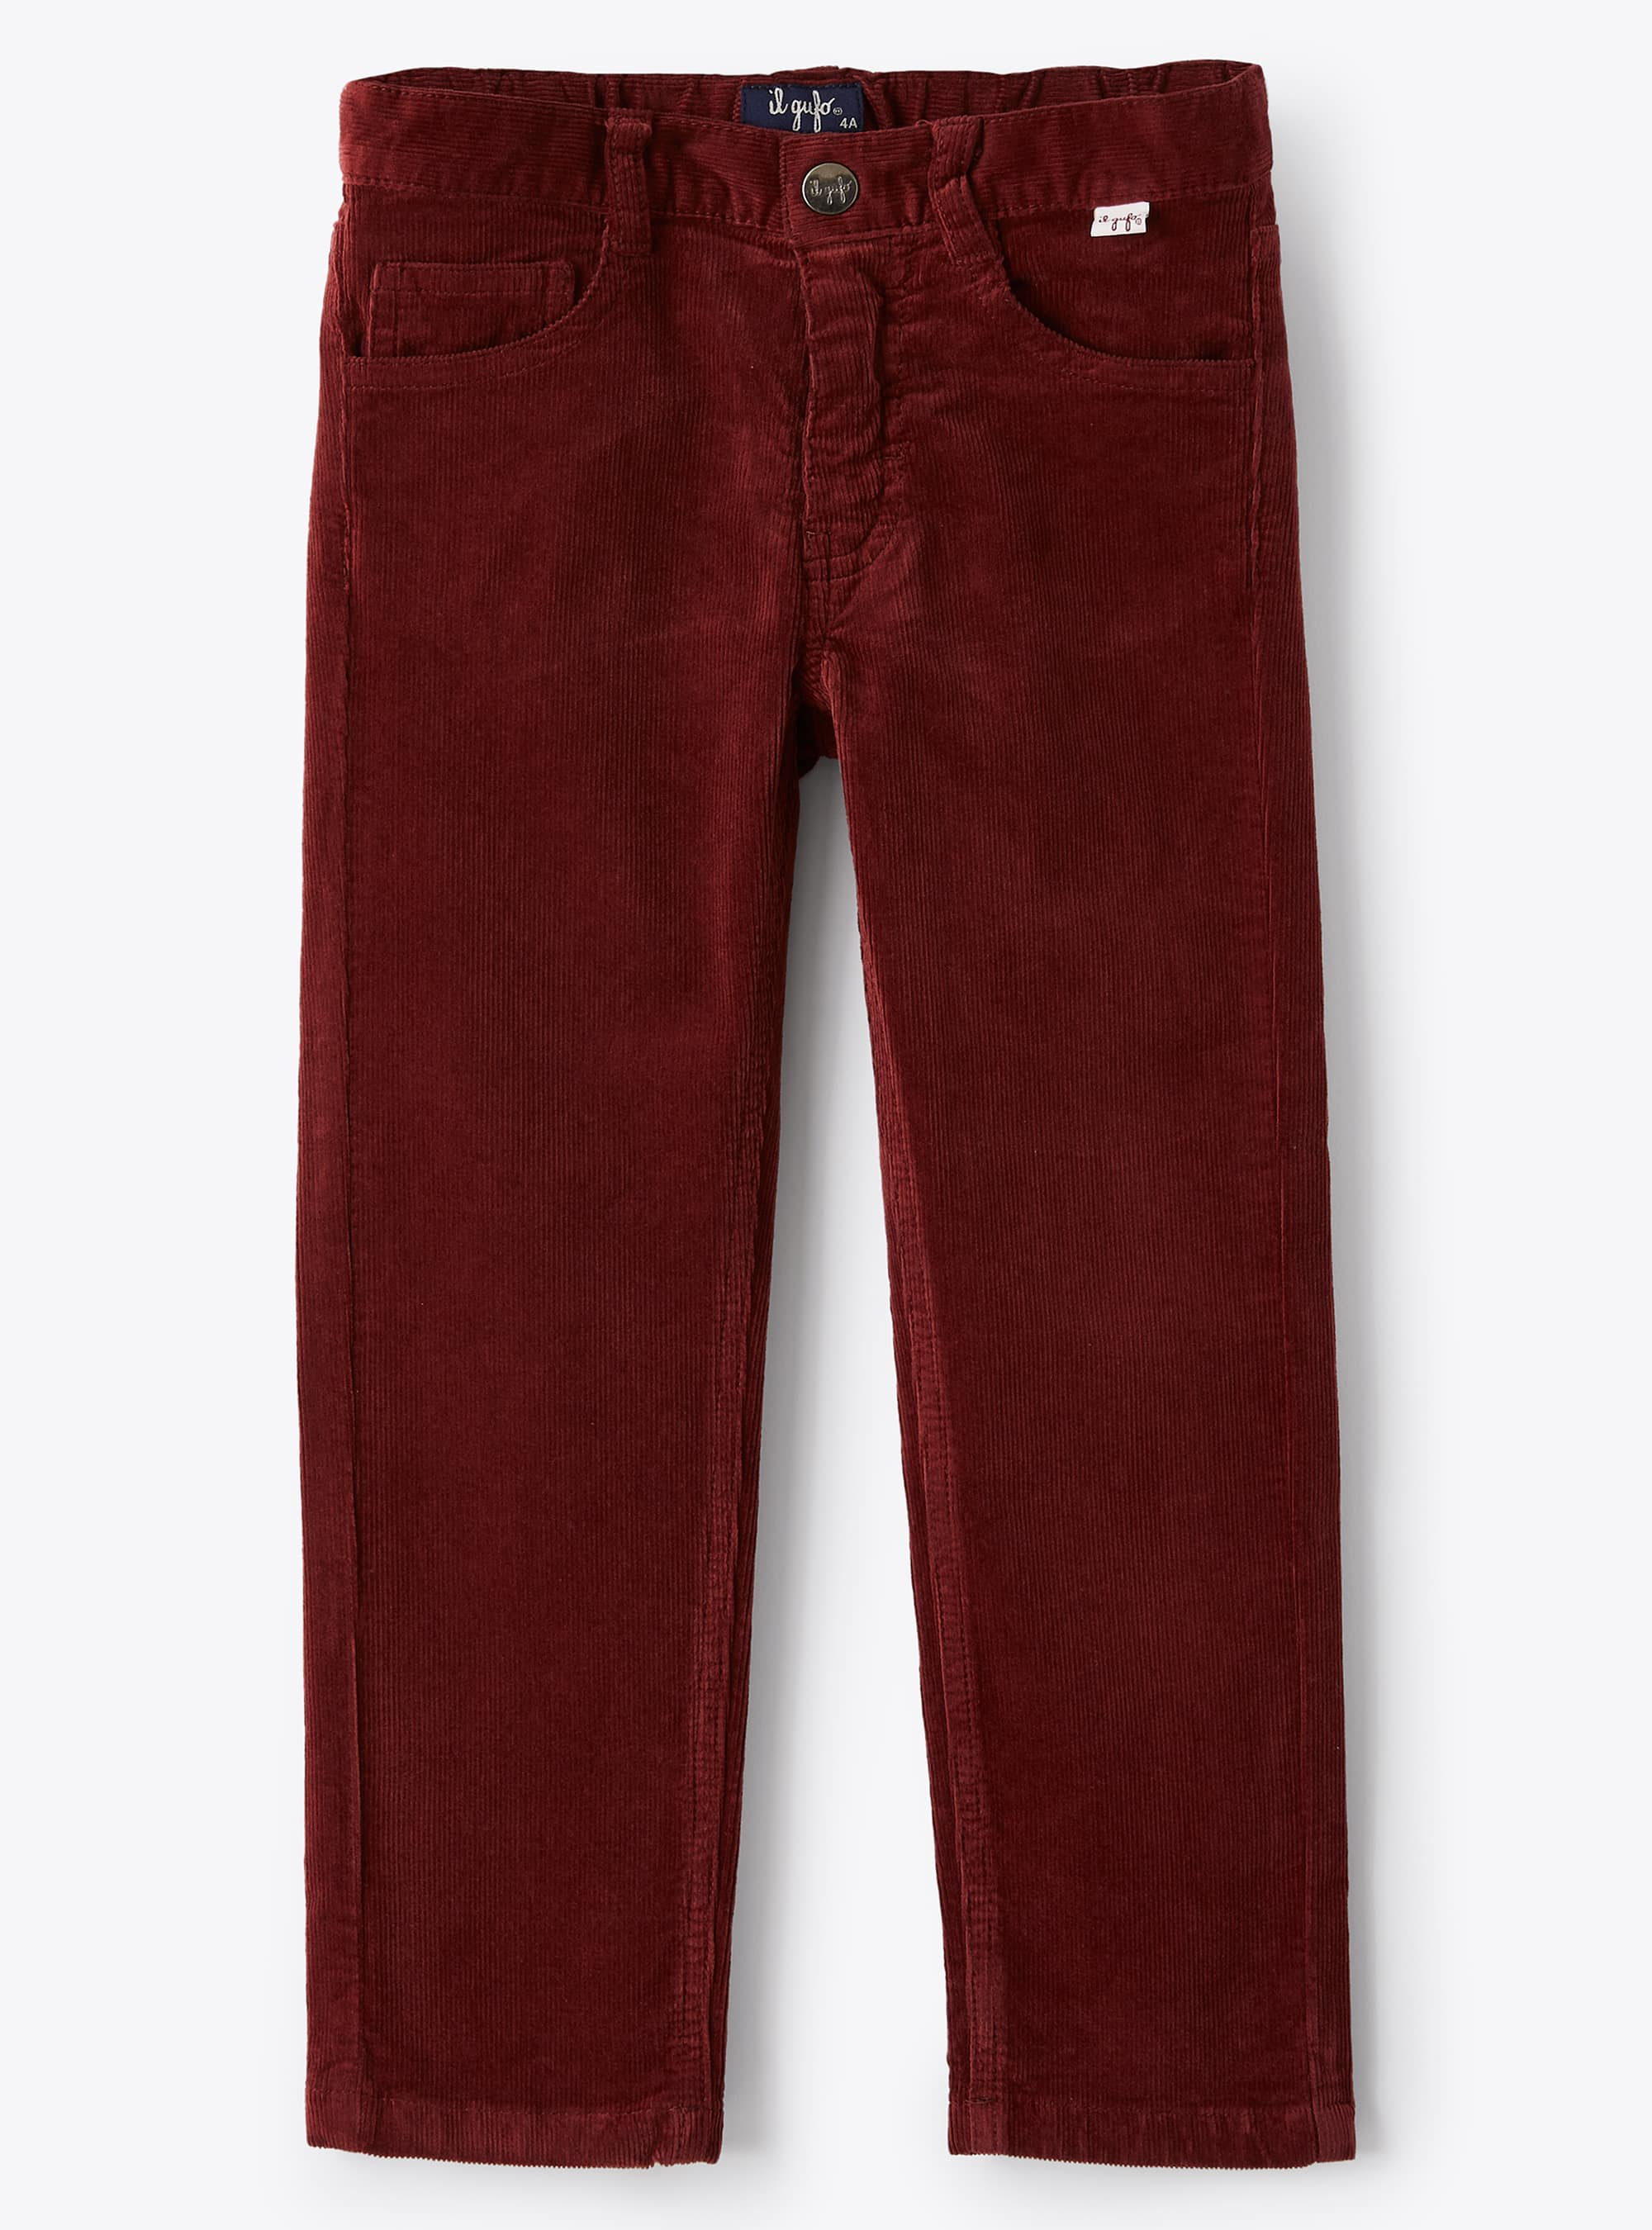 Regular fit burgundy corduroy trousers - Trousers - Il Gufo